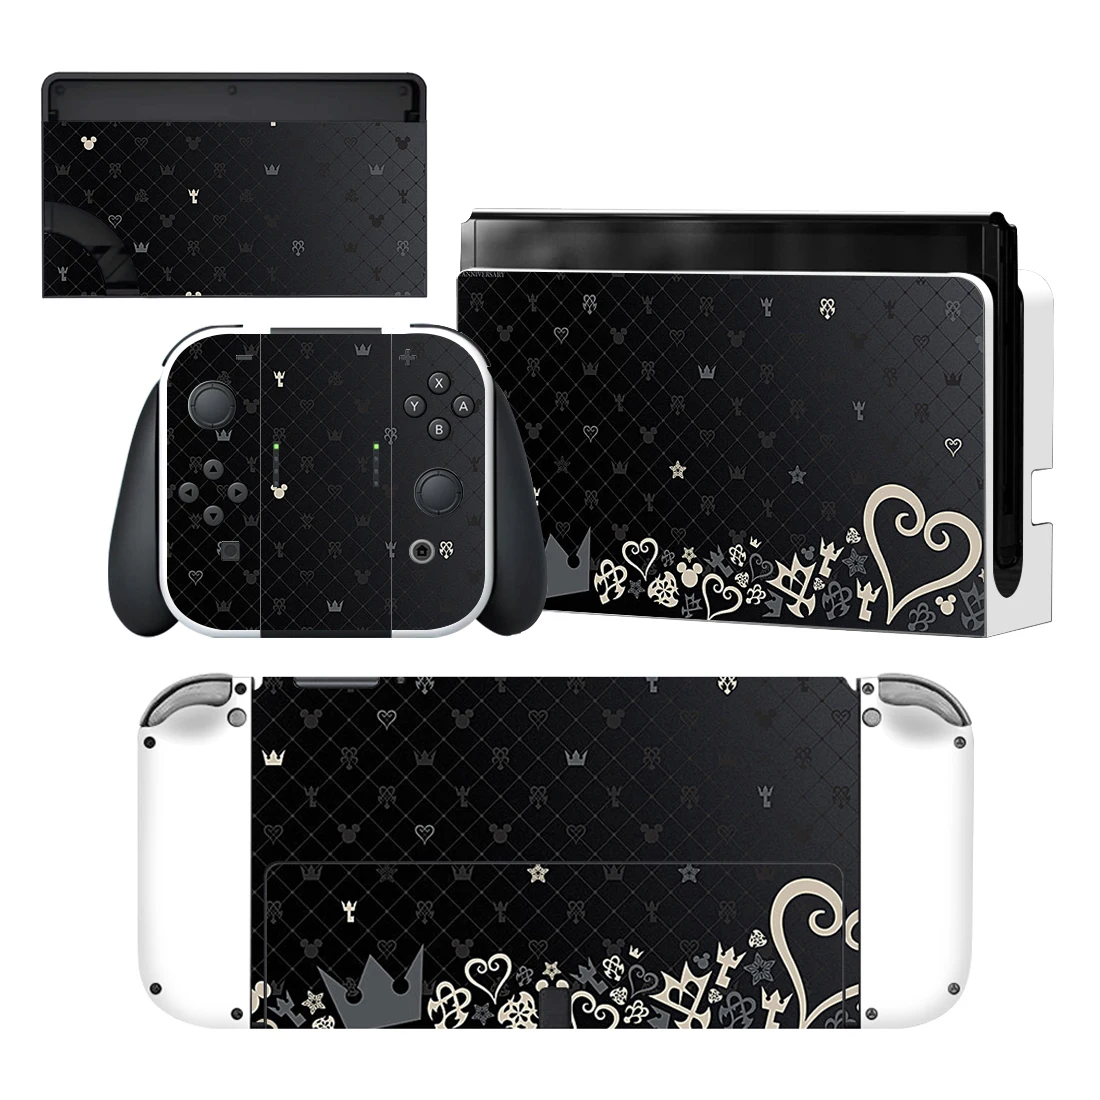 

Kingdom Hearts Nintendoswitch Skin Cover Sticker Decal for Nintendo Switch OLED Console Joy-con Controller Dock Vinyl